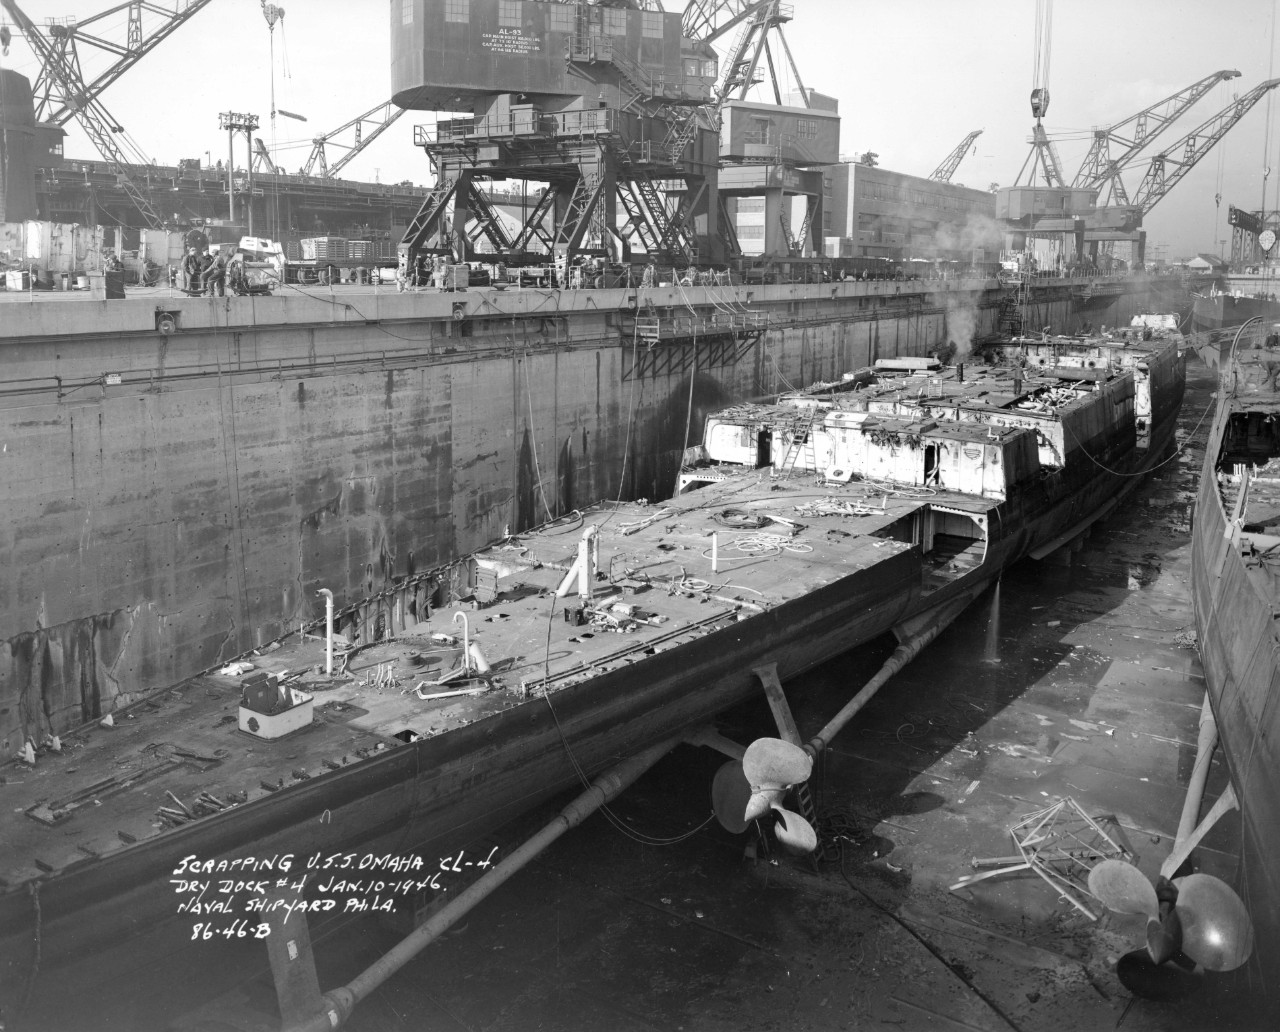 Scrapping ex-Omaha proceeds at the Philadelphia Naval Shipyard, 10 January 1946, a process being carried out on two of her sisters (R) in the same dry dock. (Ships History Files, Naval History and Heritage Command, History and Archives Division)